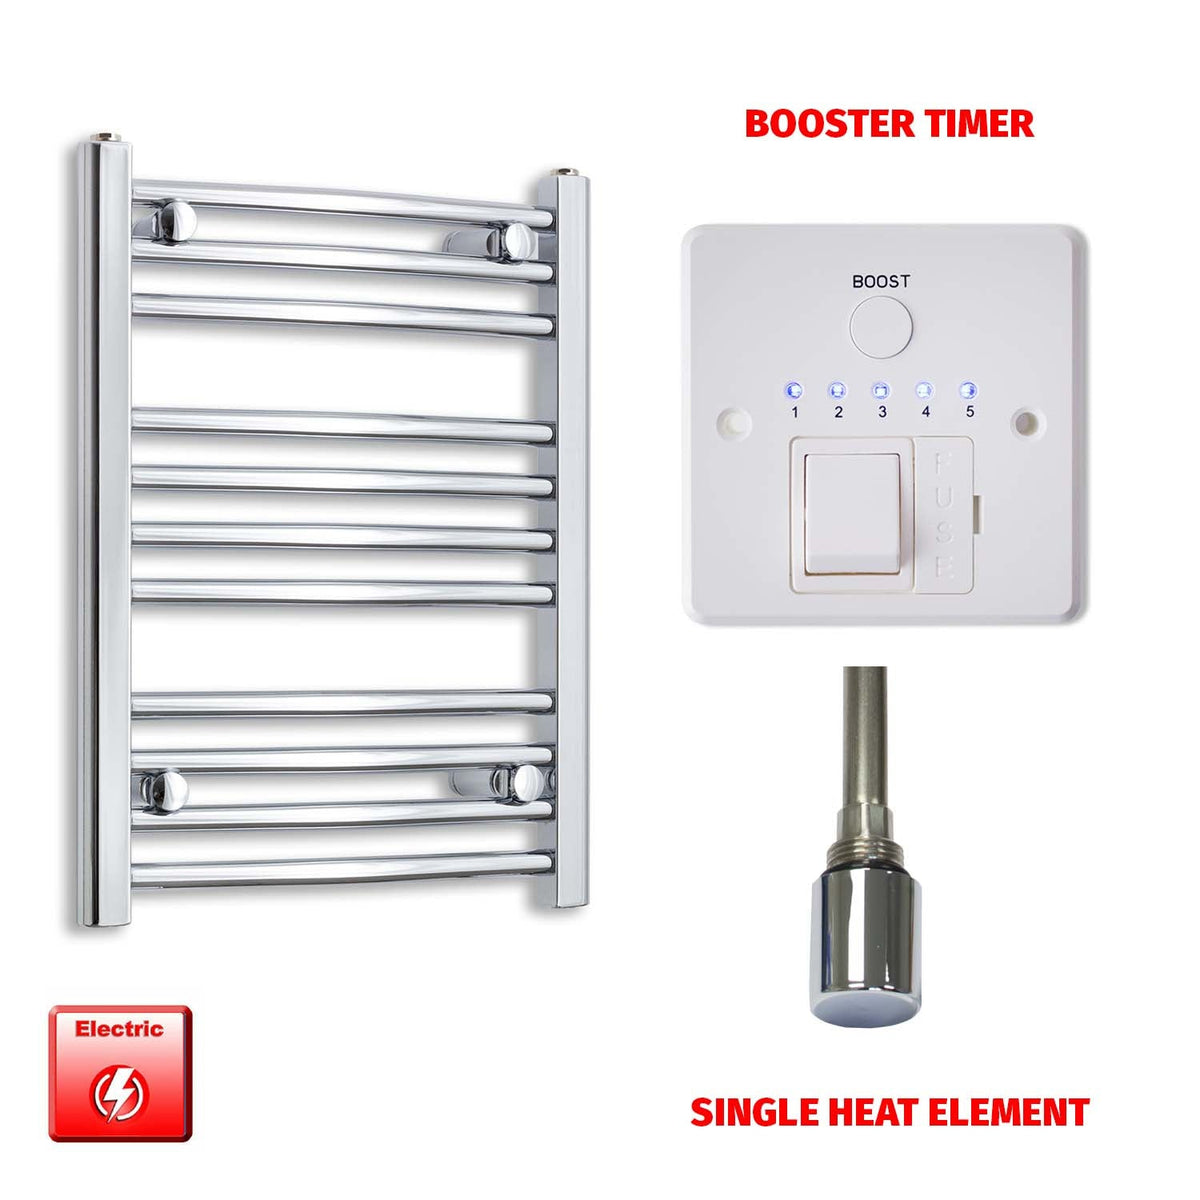 600mm High 400mm Wide Pre-Filled Electric Heated Towel Radiator Straight Chrome Single heat element Booster timer